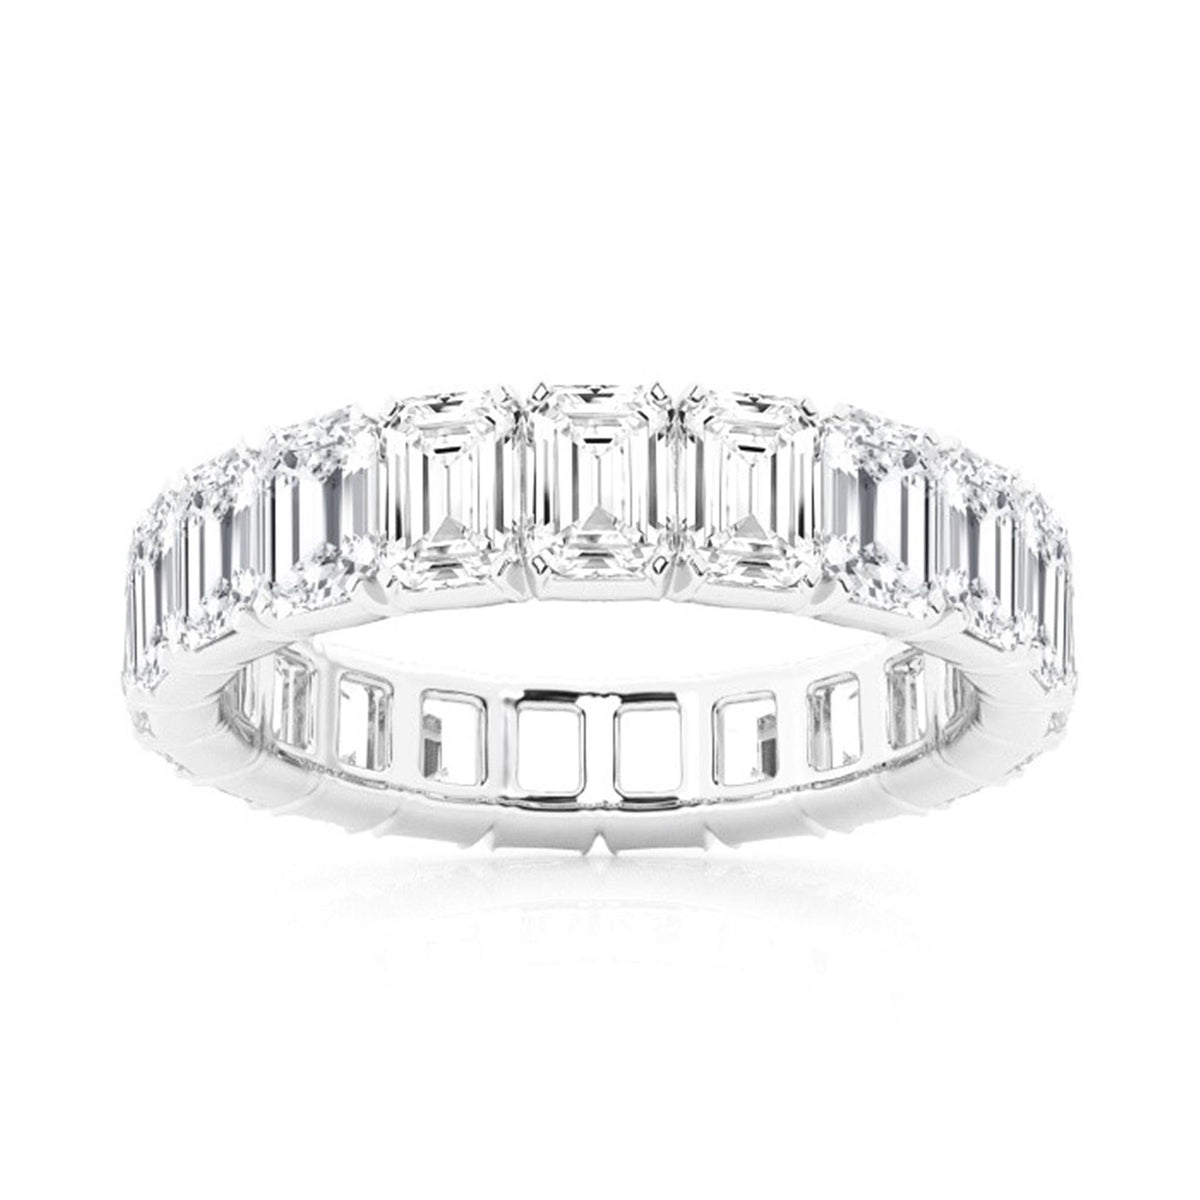 14Kt White Gold Eternity Wedding Ring With 6.75cttw Emerald-Cut Natural Diamonds